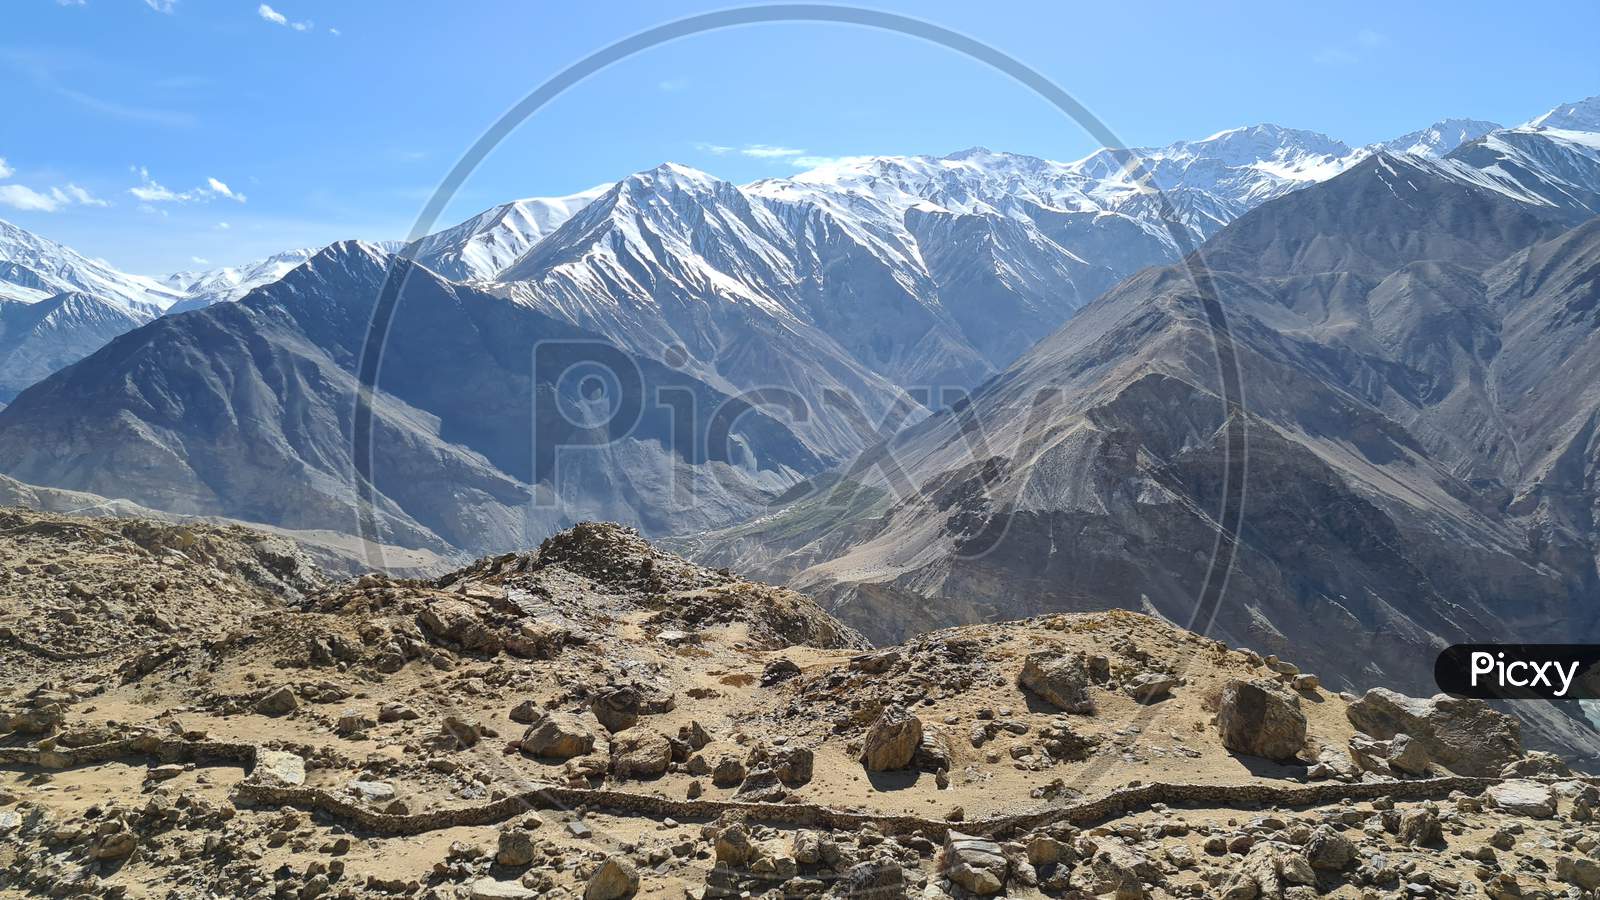 Landscapes with snow capped mountains in the Spiti valley of Himachal Pradesh